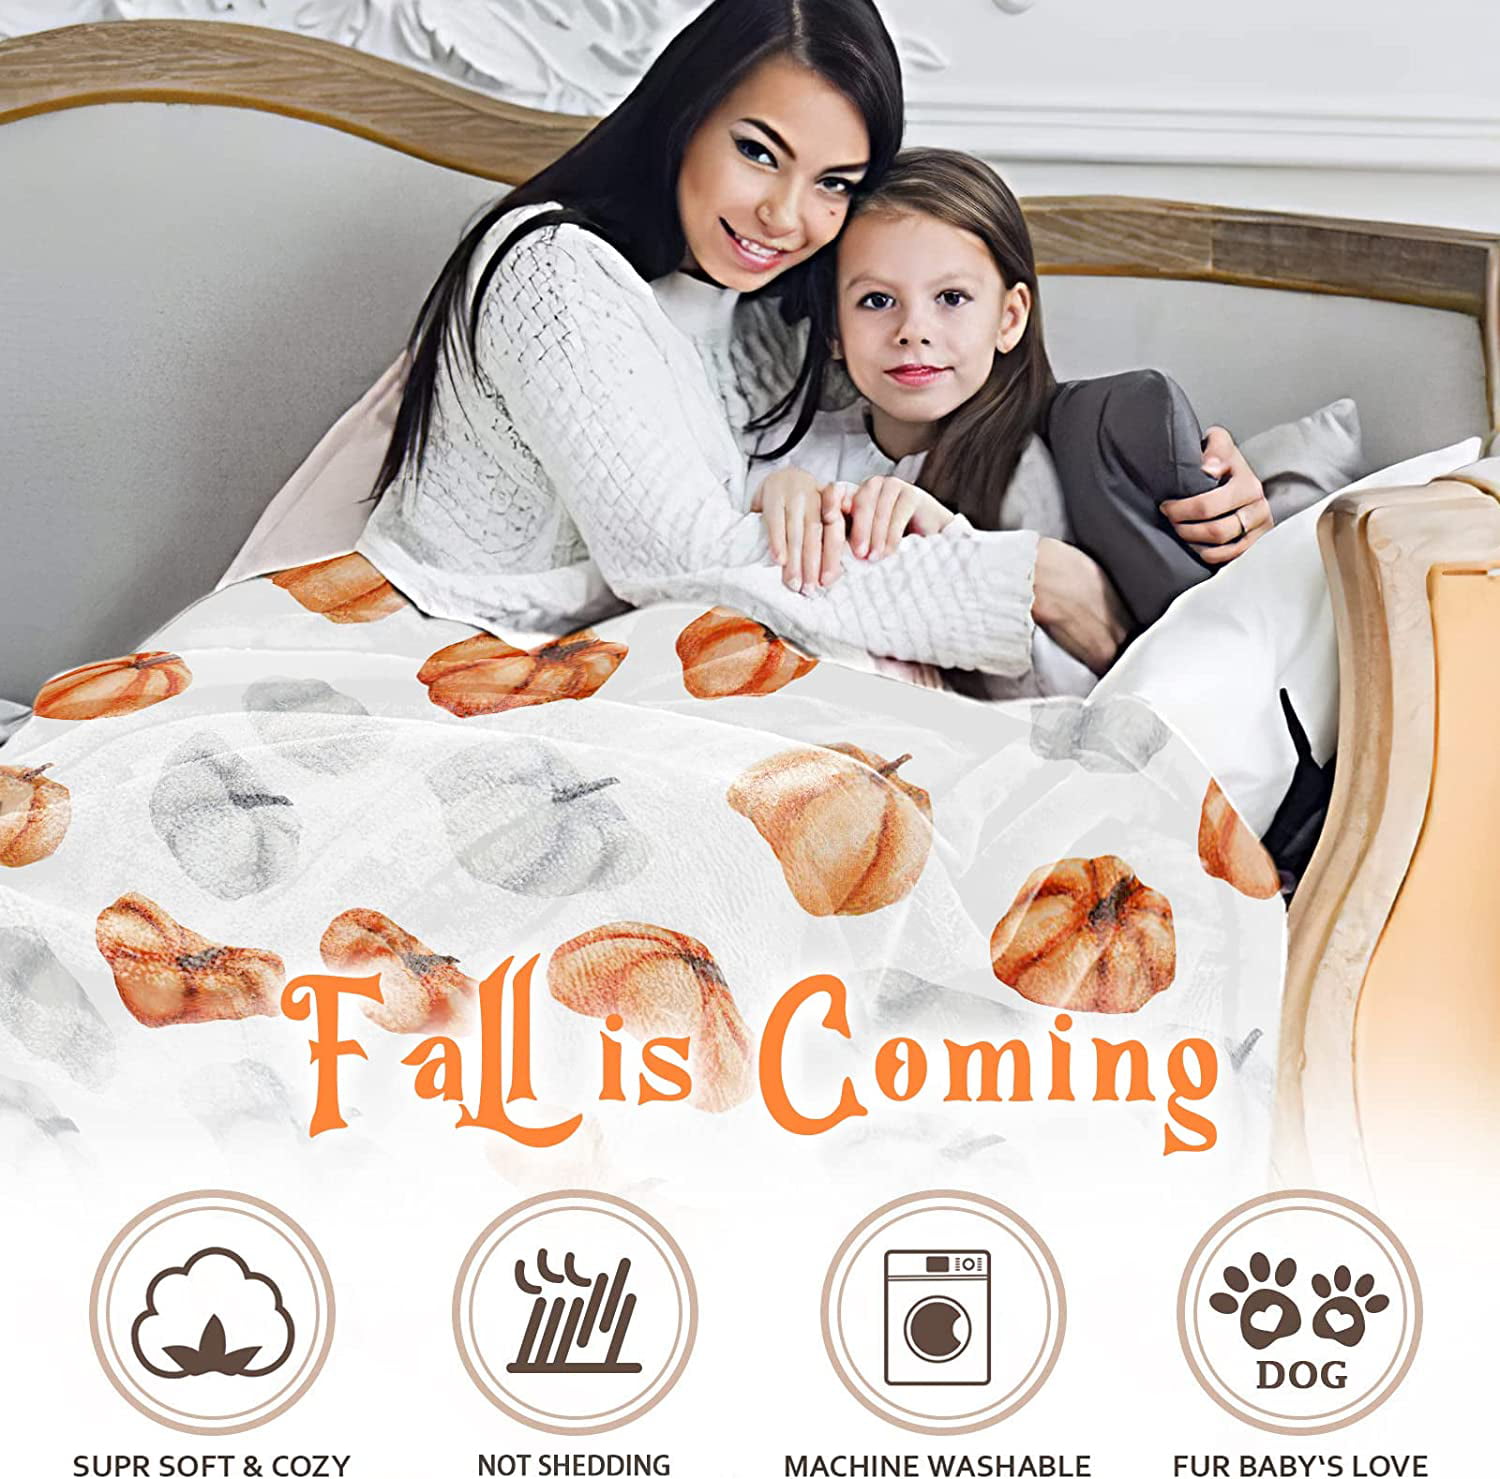  Fall Plush Blanket, Fall Thanksgiving Maple Leaves Black Untra  Soft Flannel Fleece Throw Blankets Warm Fuzzy Microfiber Blankets for  Couples Bed Sofa Living Room Bedroom 39'' x 59'' : Home 